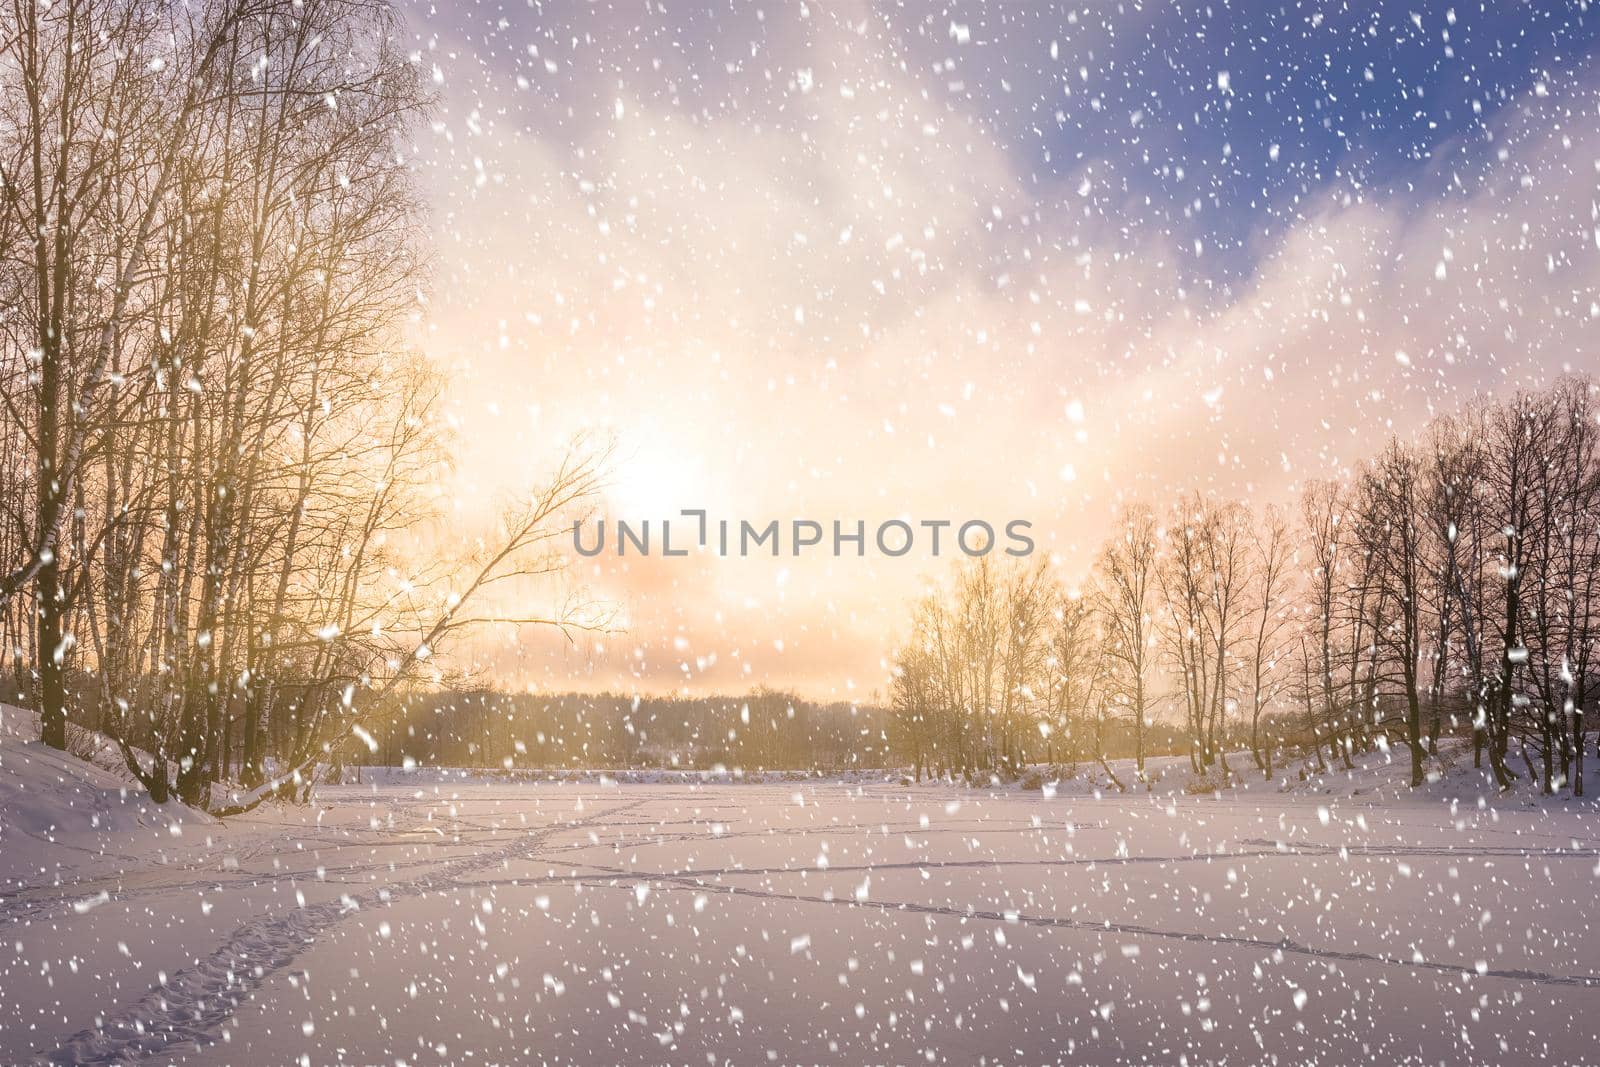 Sunset or sunrise on a frozen pond with birch trees along the banks and falling snow in winter. Snowfall.